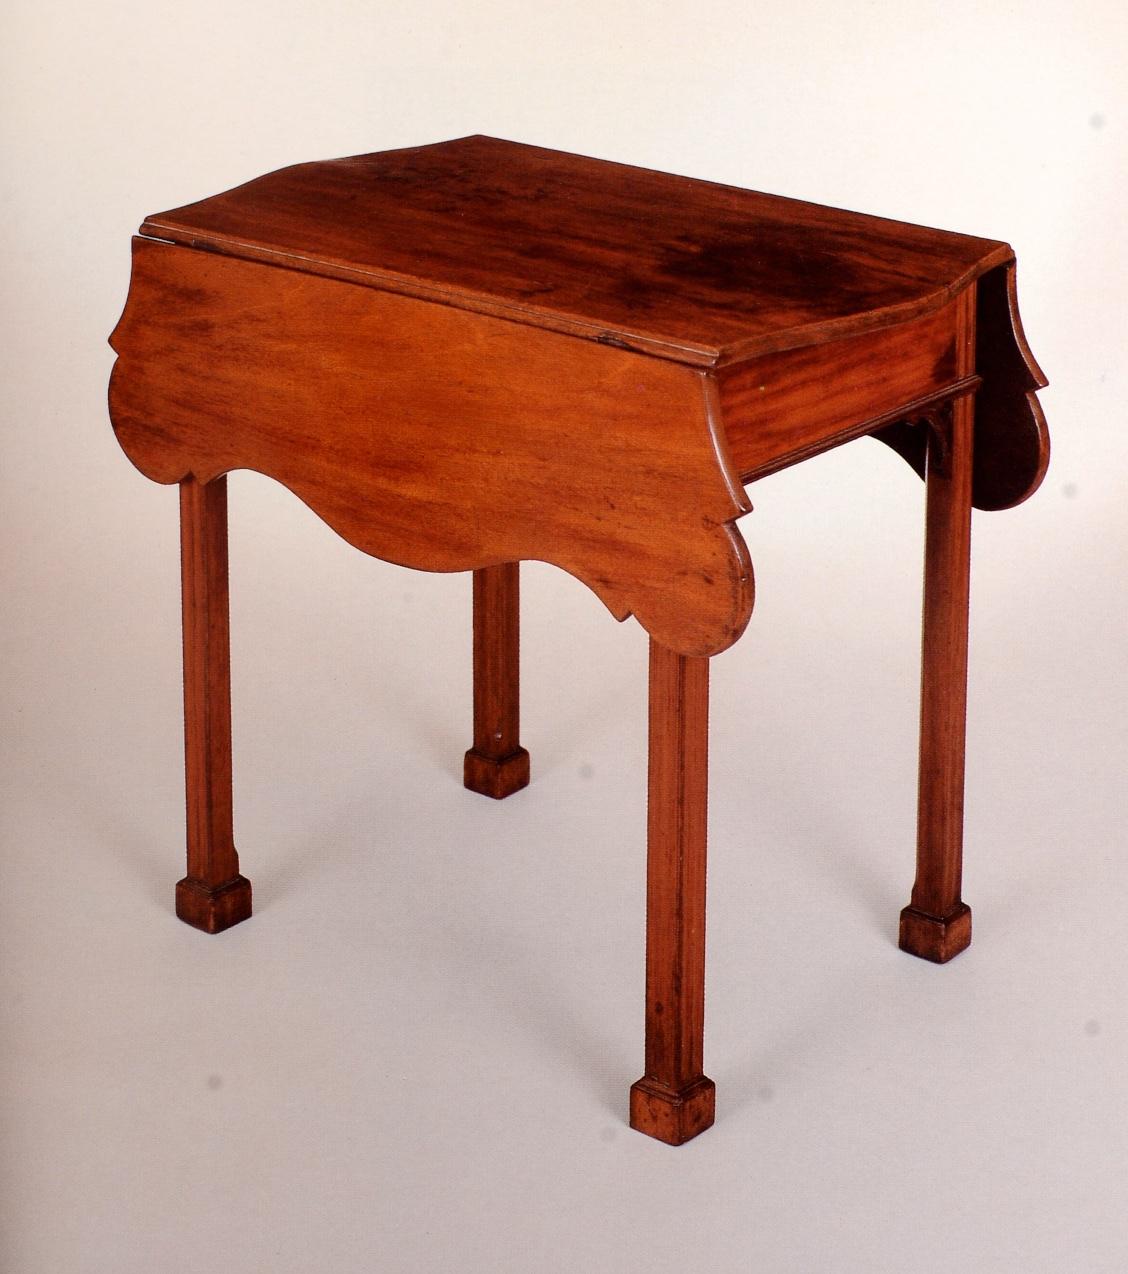 Late 20th Century Sotheby's: Important American Furniture, Contents of 